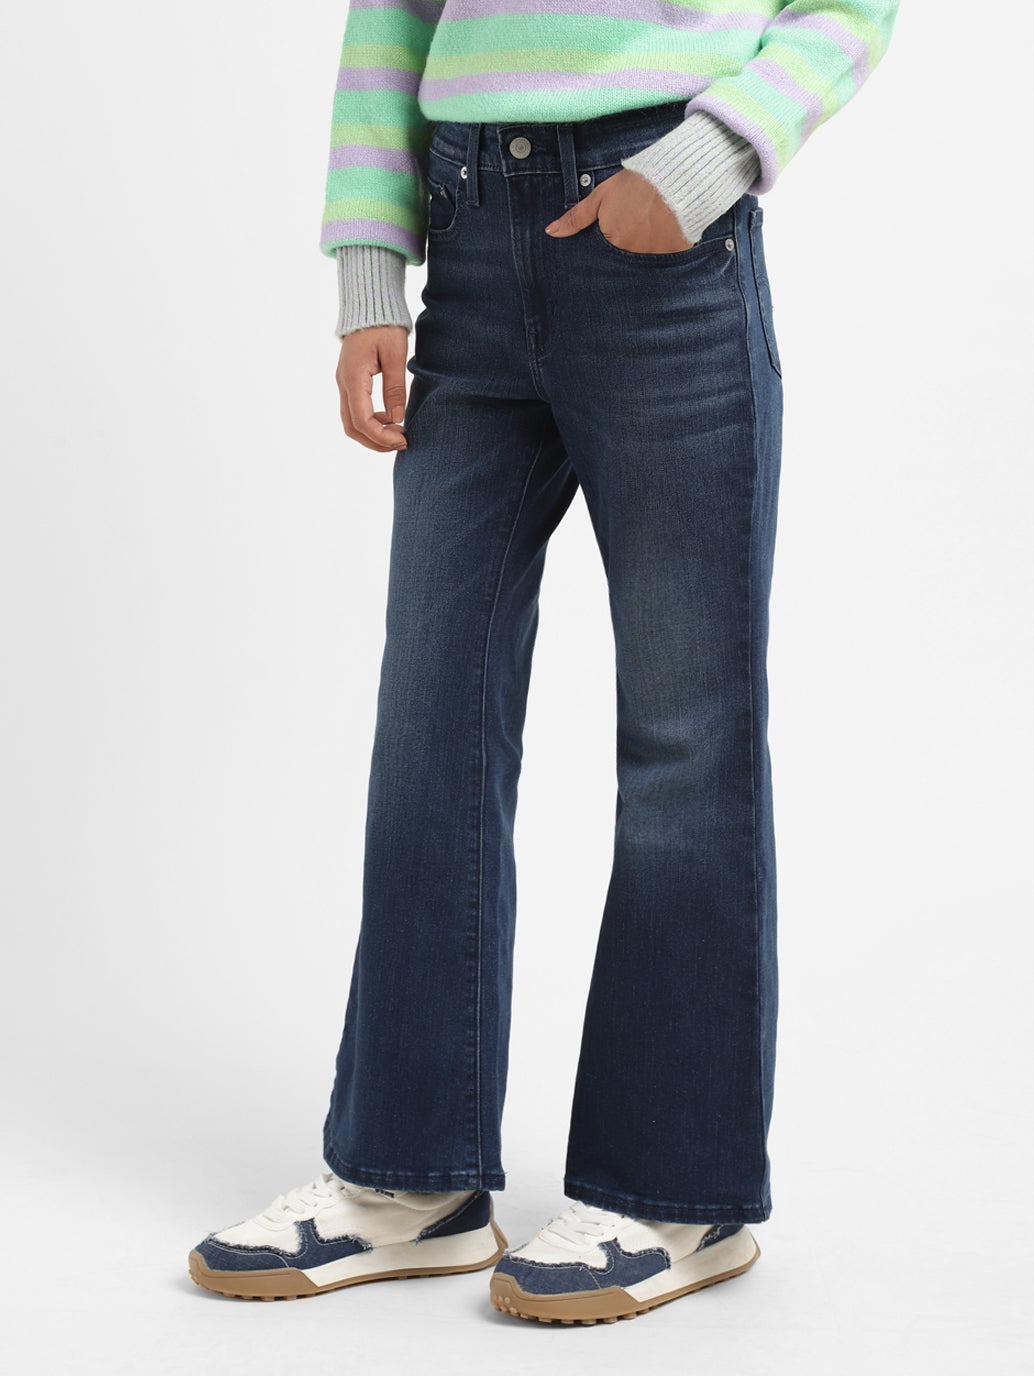 Women's High-Rise 711 Bootcut Skinny Fit Jeans